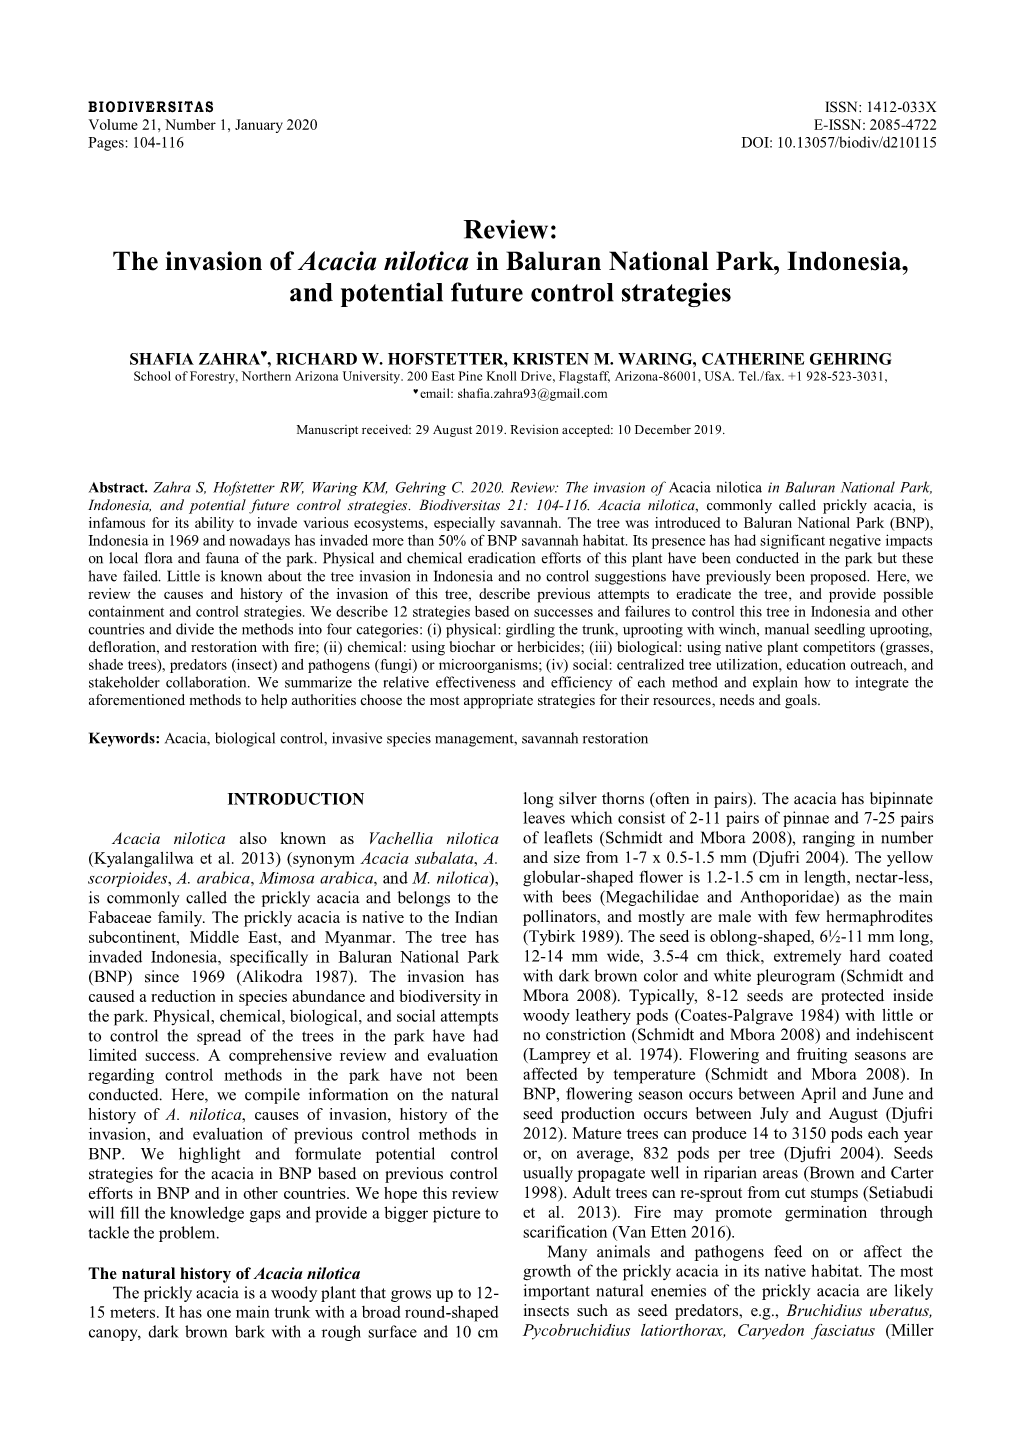 The Invasion of Acacia Nilotica in Baluran National Park, Indonesia, and Potential Future Control Strategies